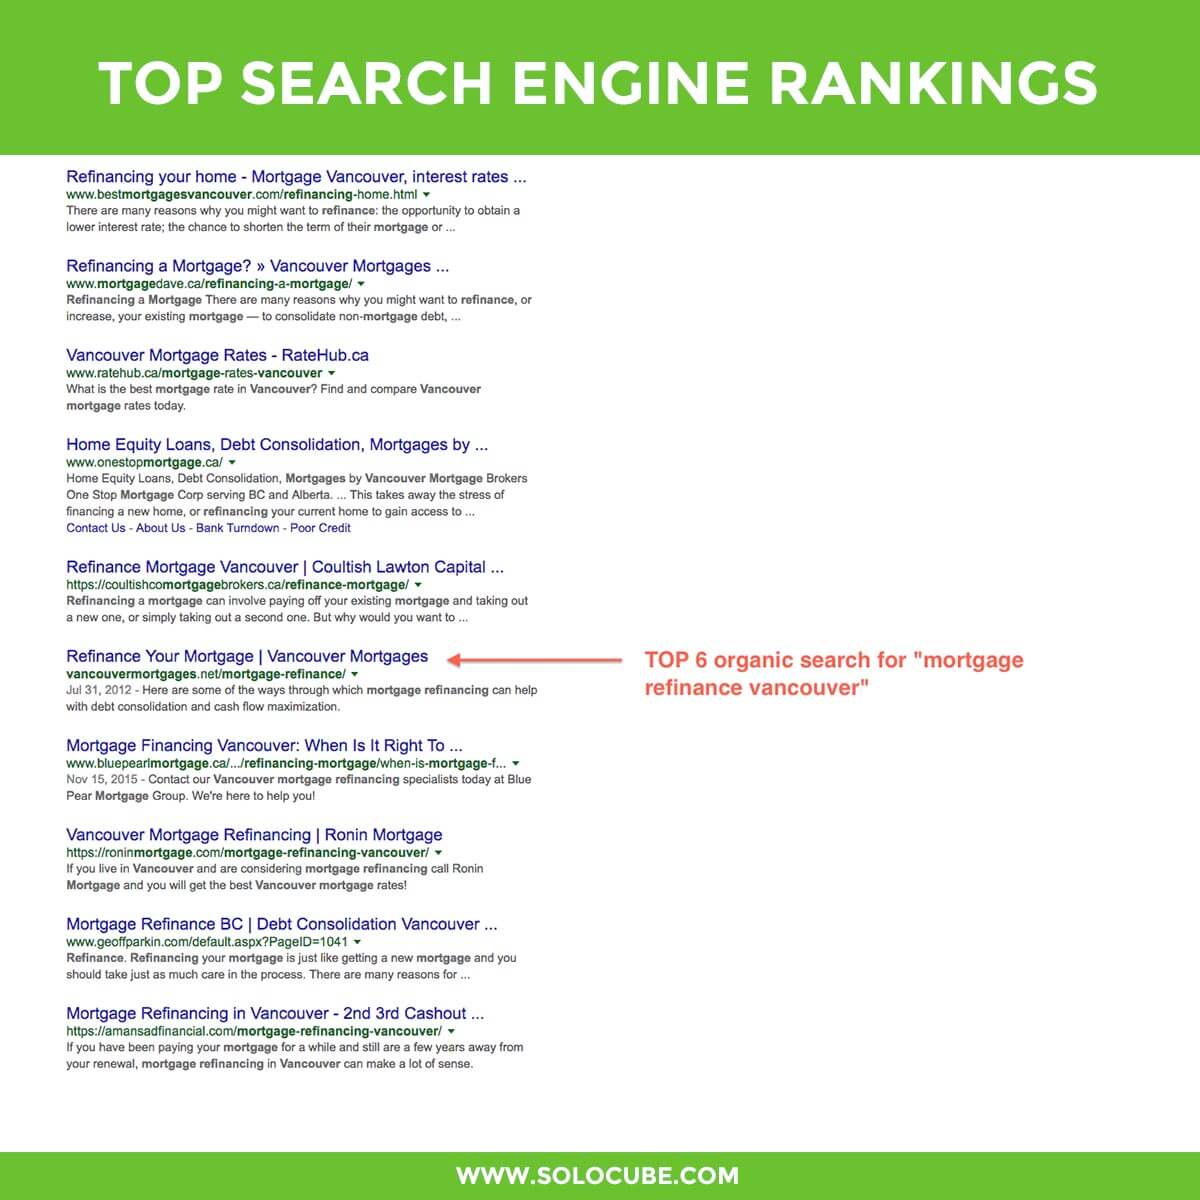 top SEO google ranking by solocube 09 - SEO Prince George, BC